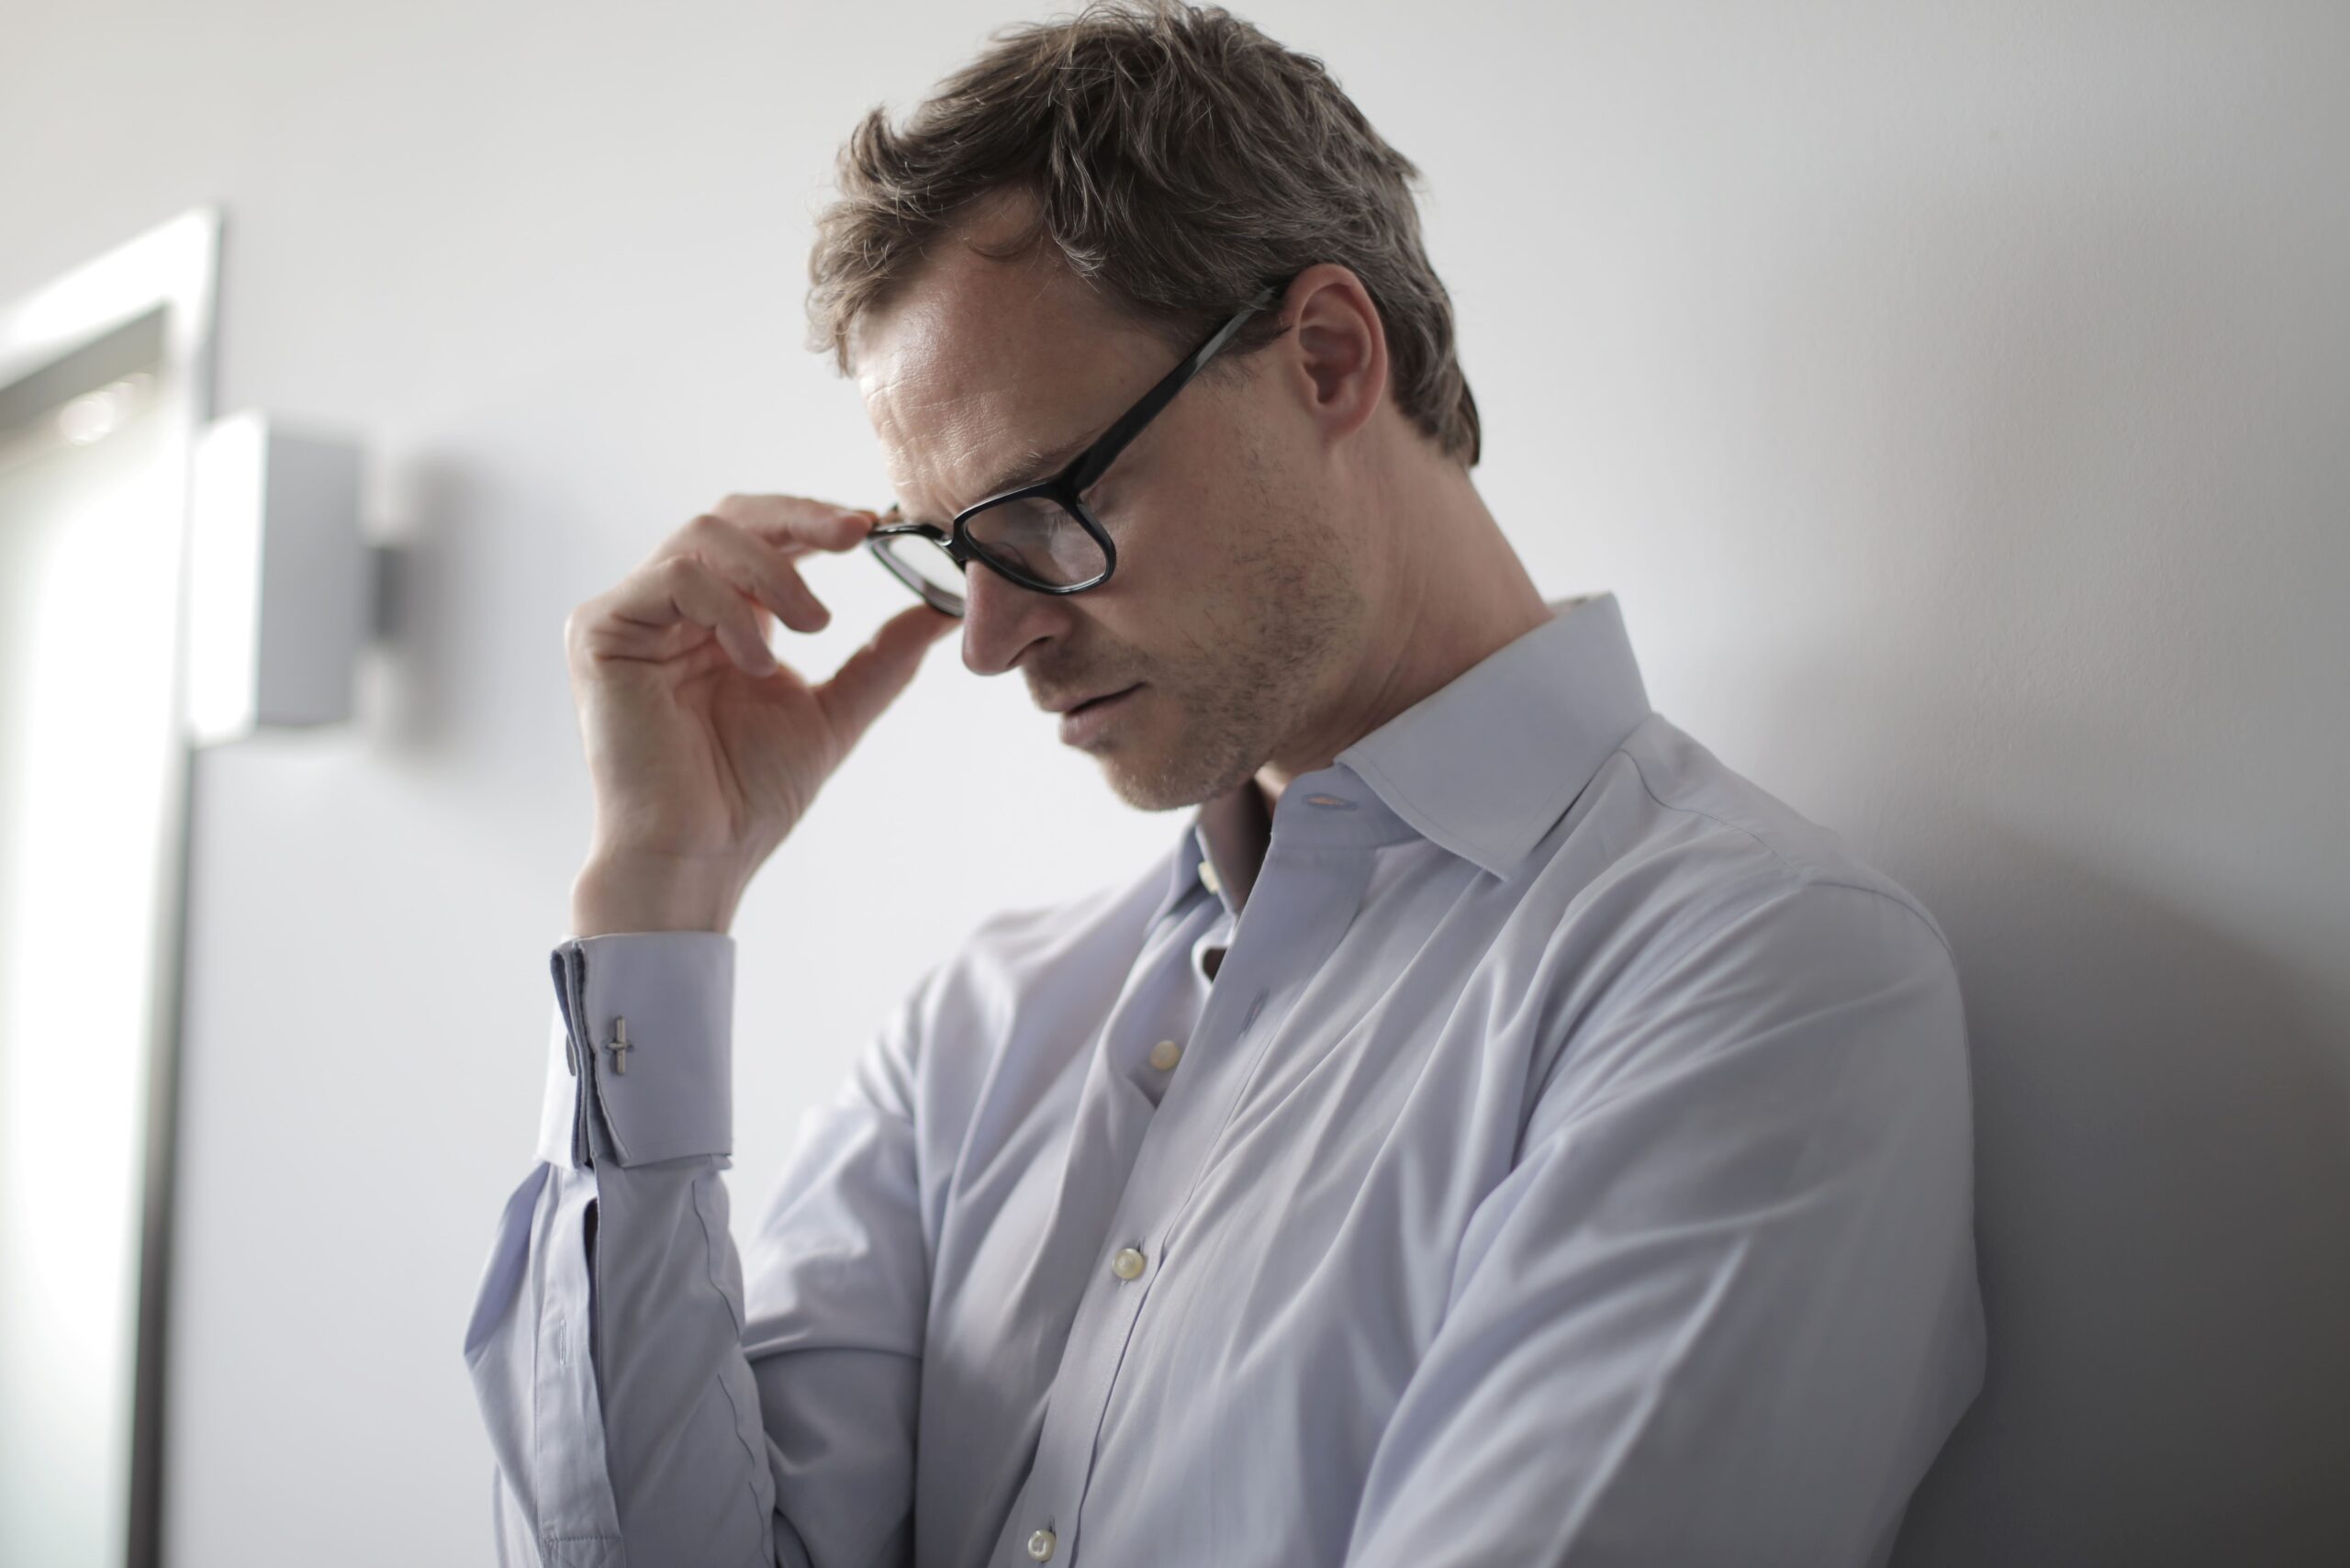 Image of man with glasses looking worried.